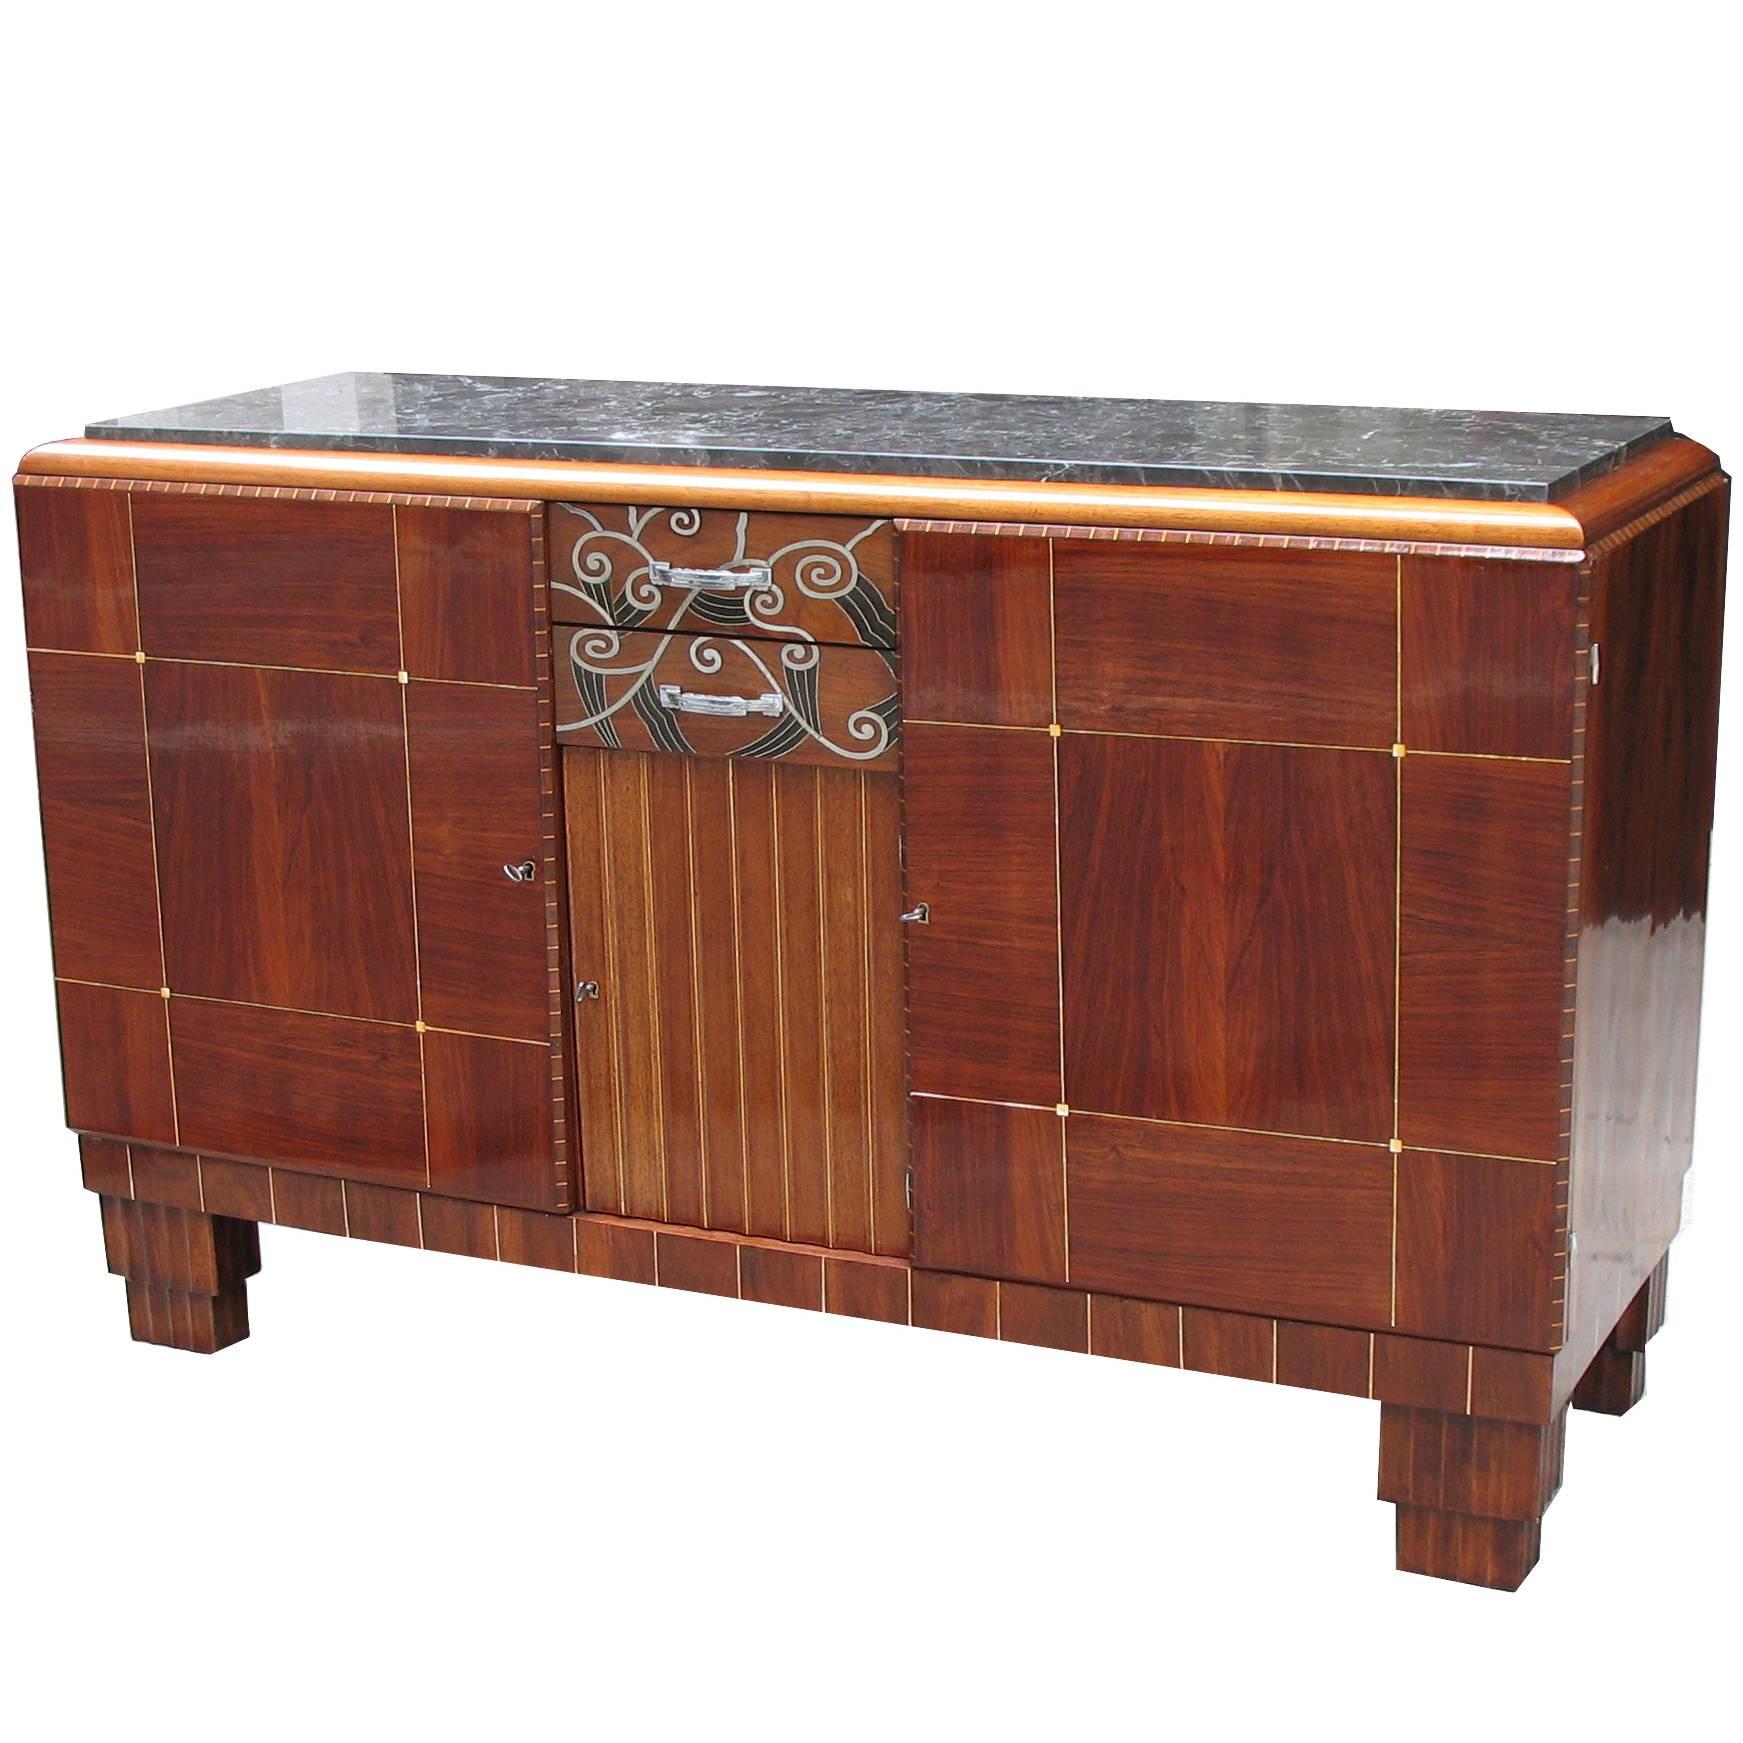 Pewter and Ivory Inlaid French Art deco Buffet For Sale